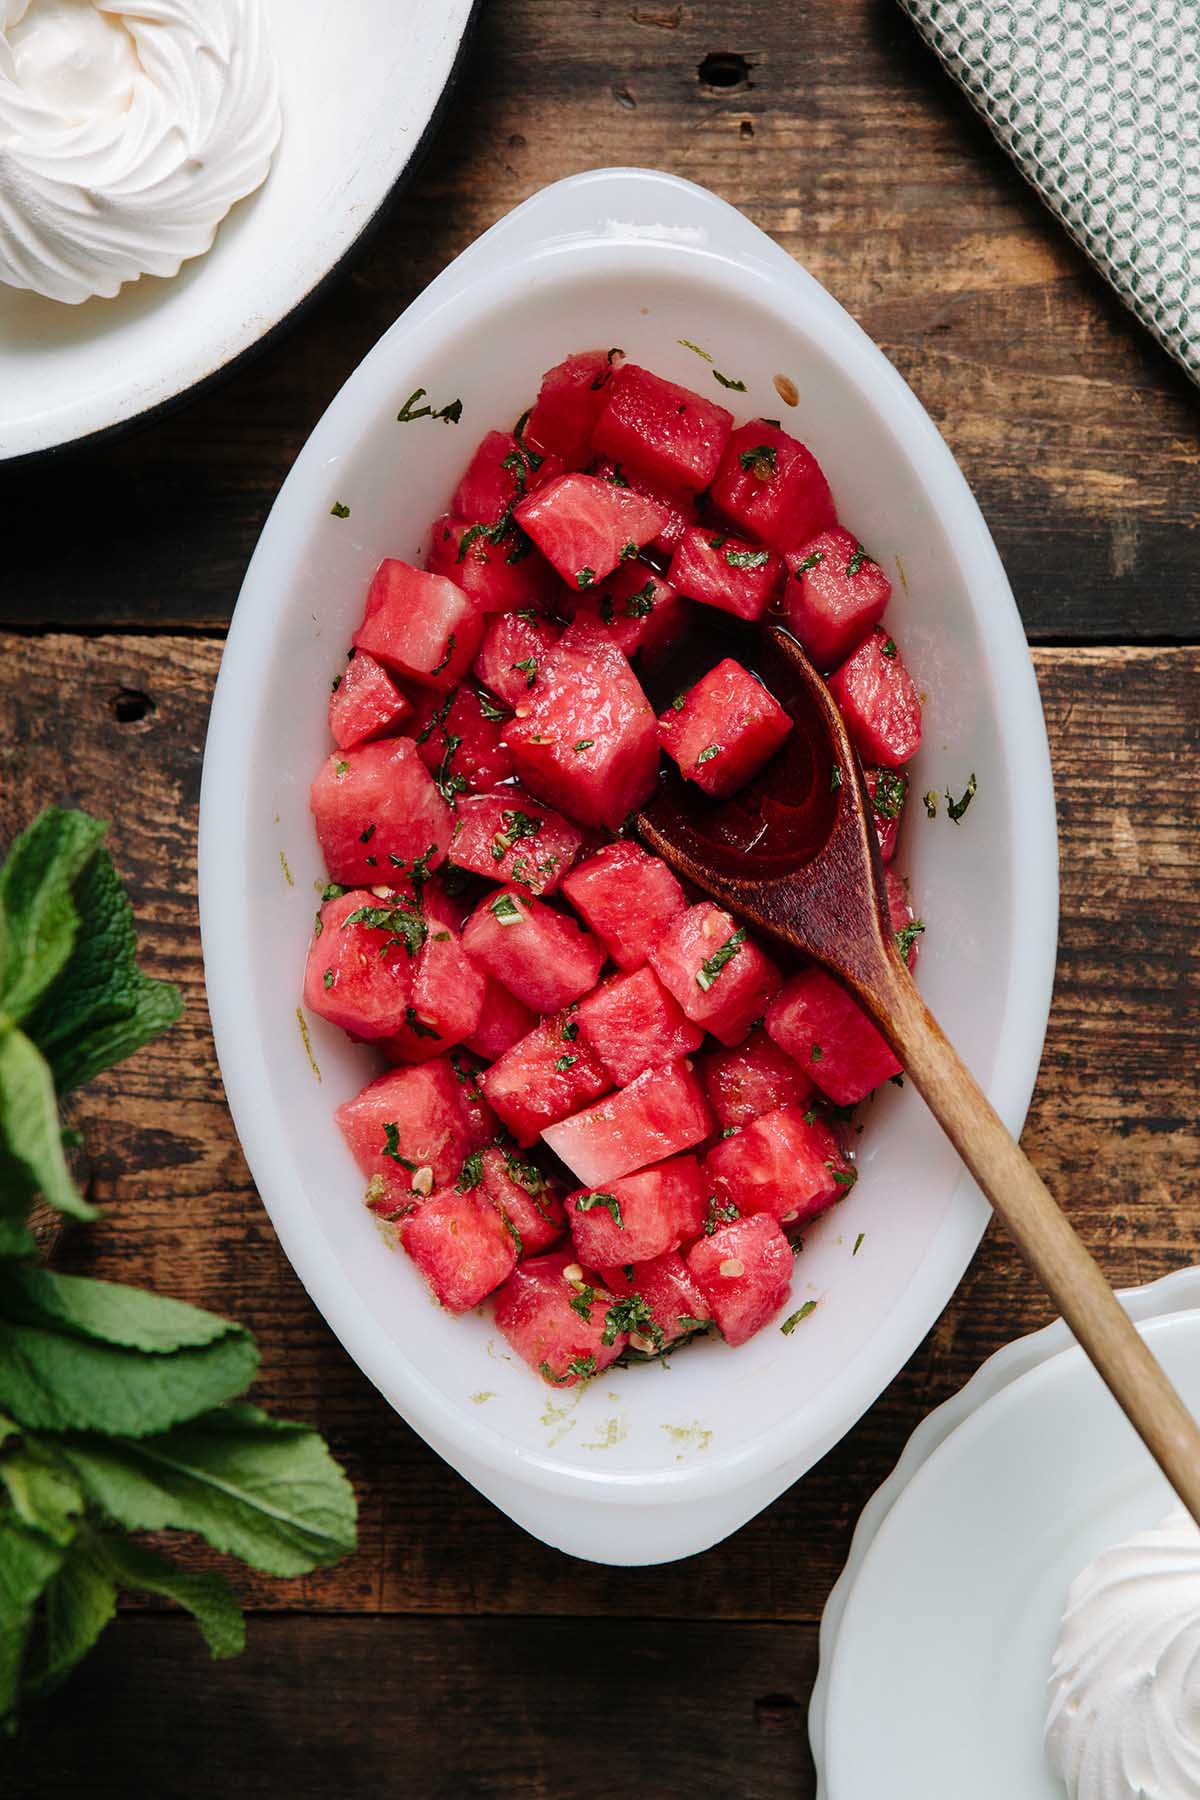 A dish of cubed watermelon.